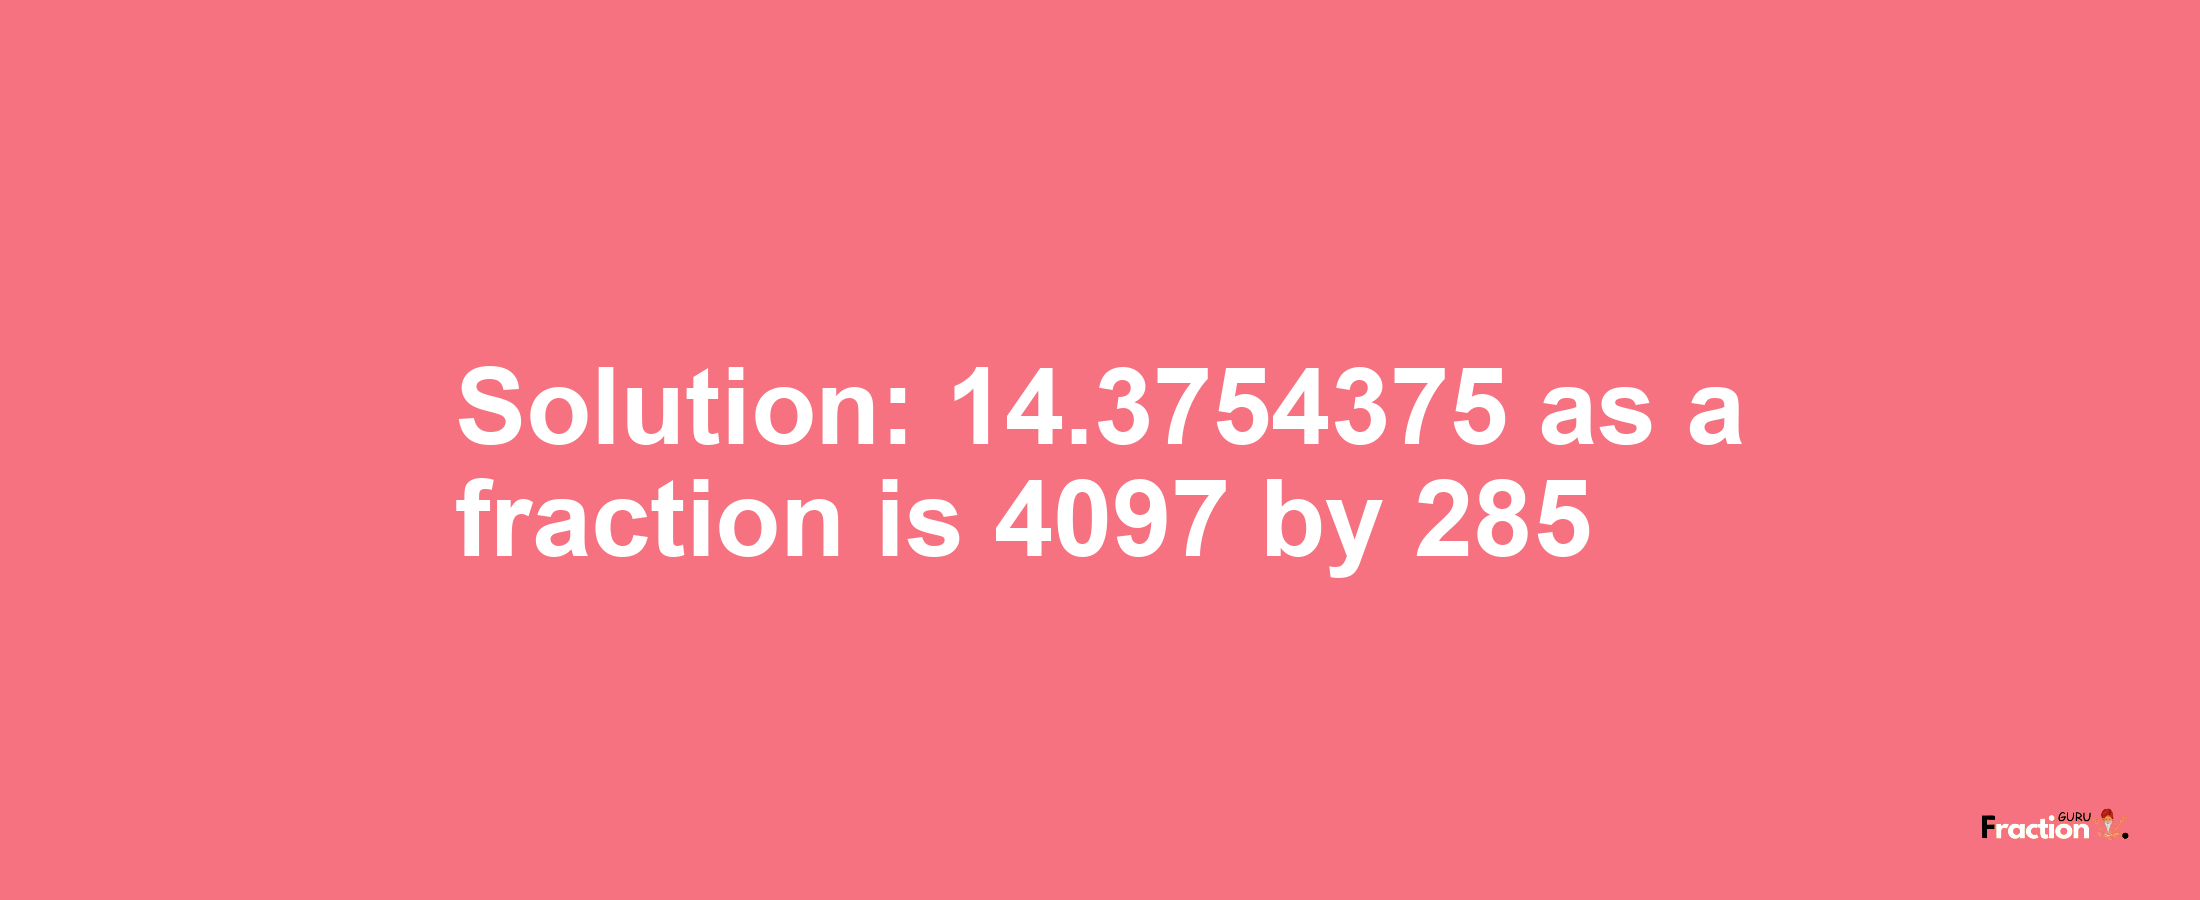 Solution:14.3754375 as a fraction is 4097/285